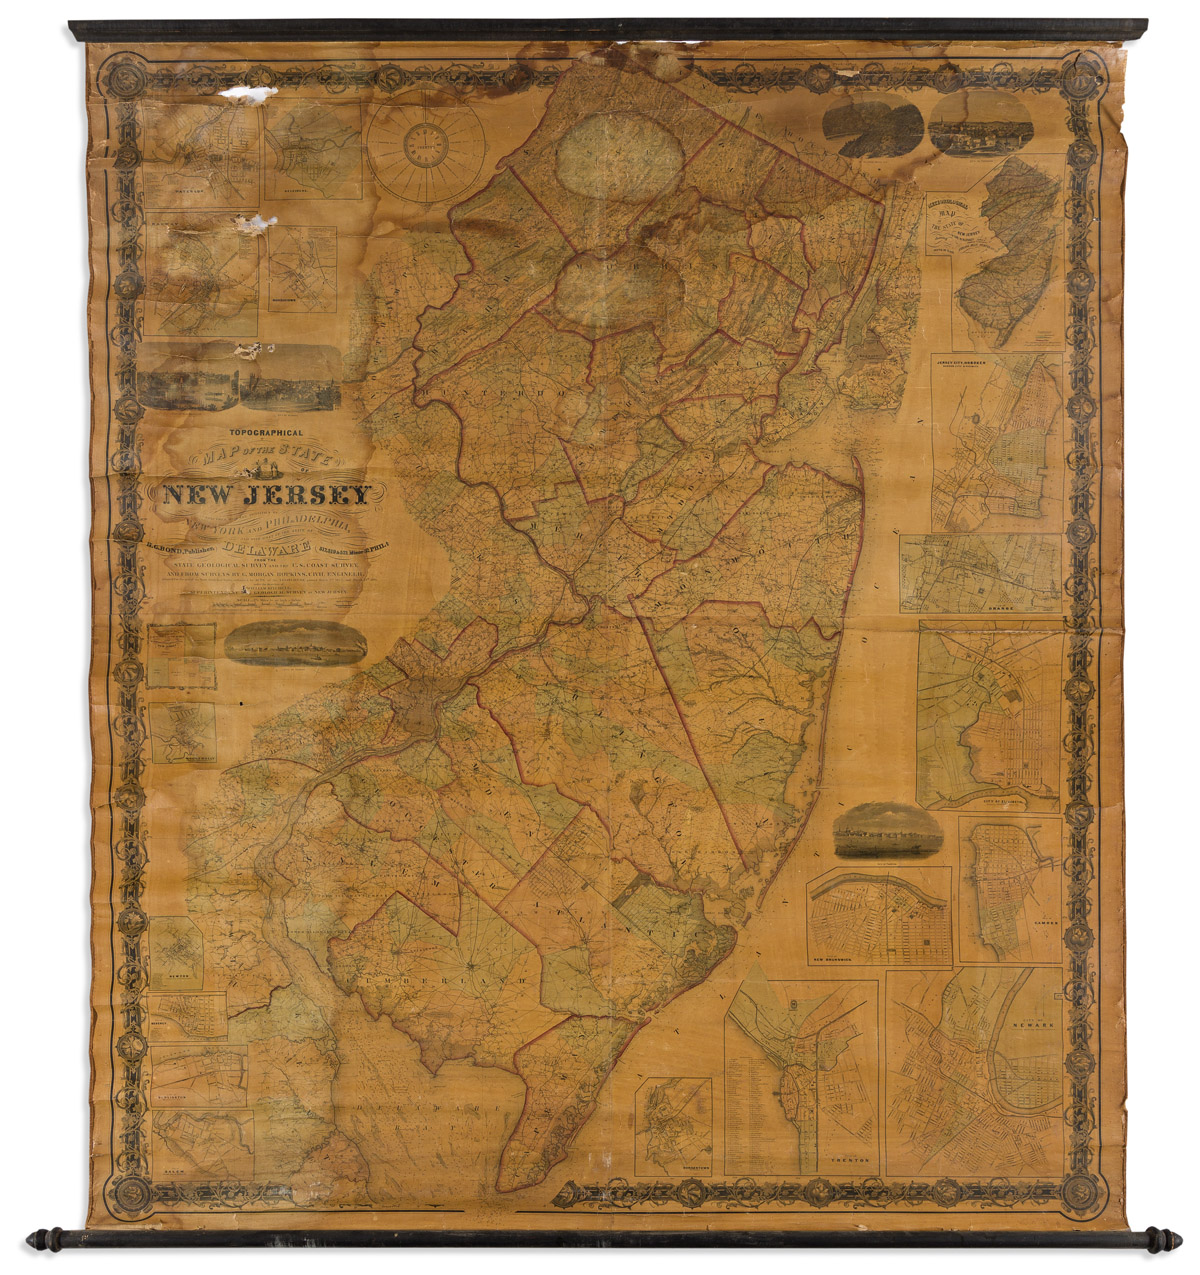 Topographical Map of the State of New Jersey